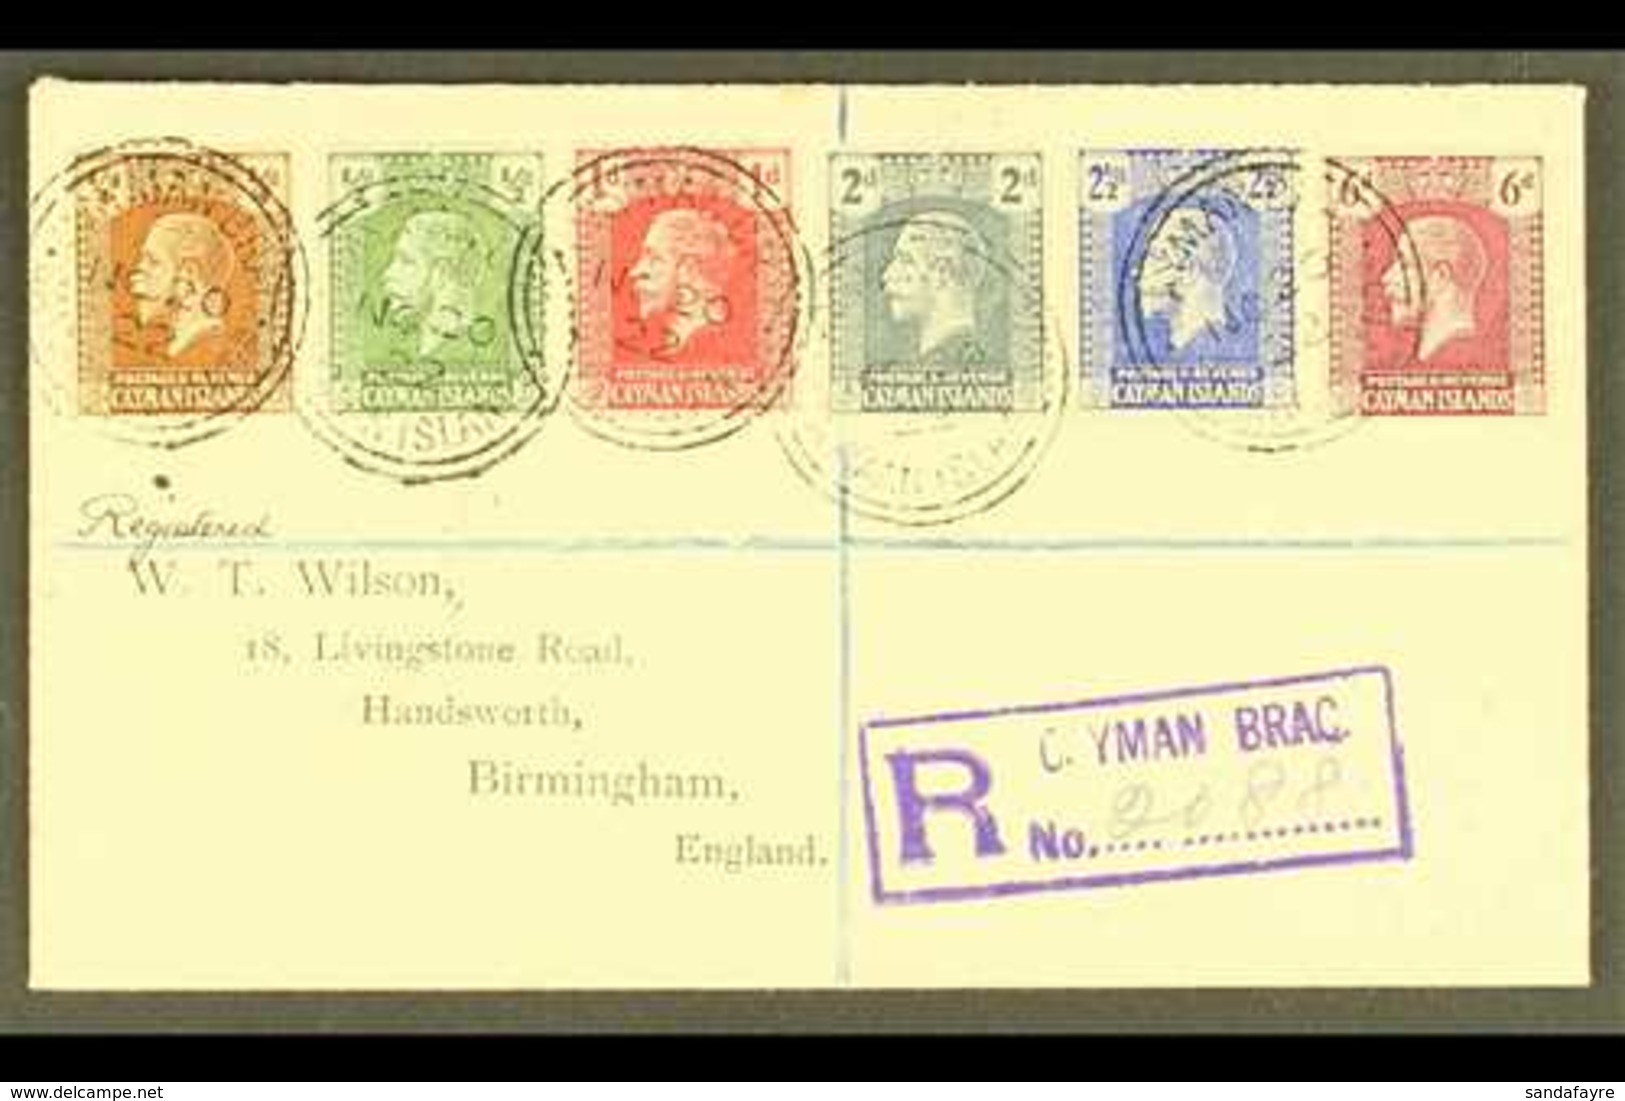 1922 (Nov) Attractive "Wilson" Registered Cover To England, Bearing 1921-26 ¼d, ½d, 1d, 2d, 2½d And 6d Tied CAYMAN BRAC  - Kaimaninseln